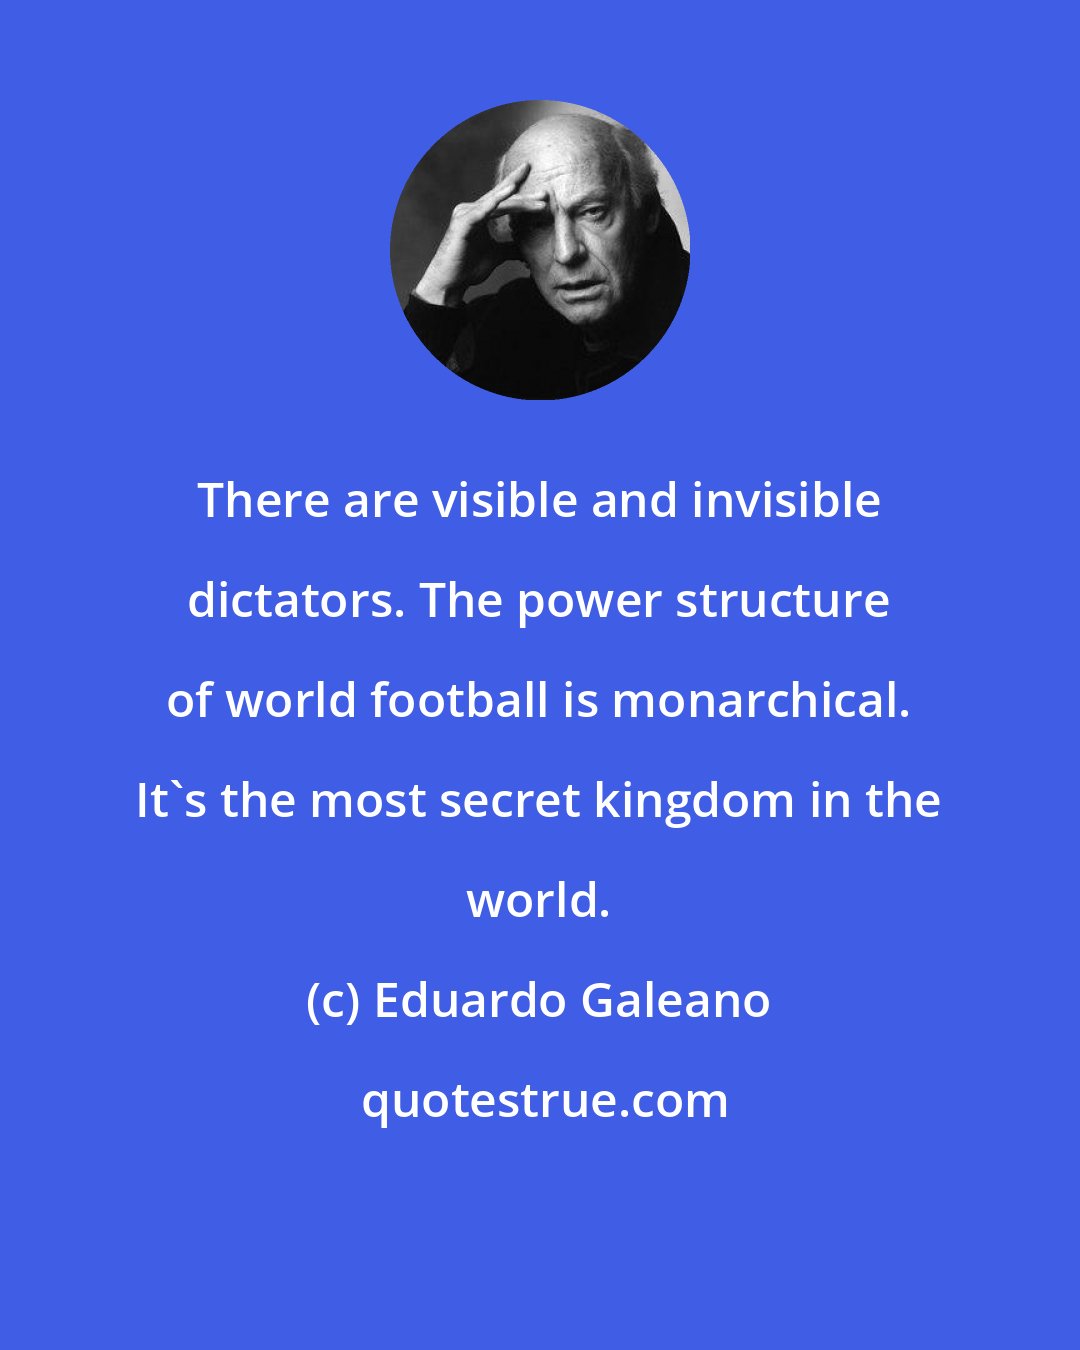 Eduardo Galeano: There are visible and invisible dictators. The power structure of world football is monarchical. It's the most secret kingdom in the world.